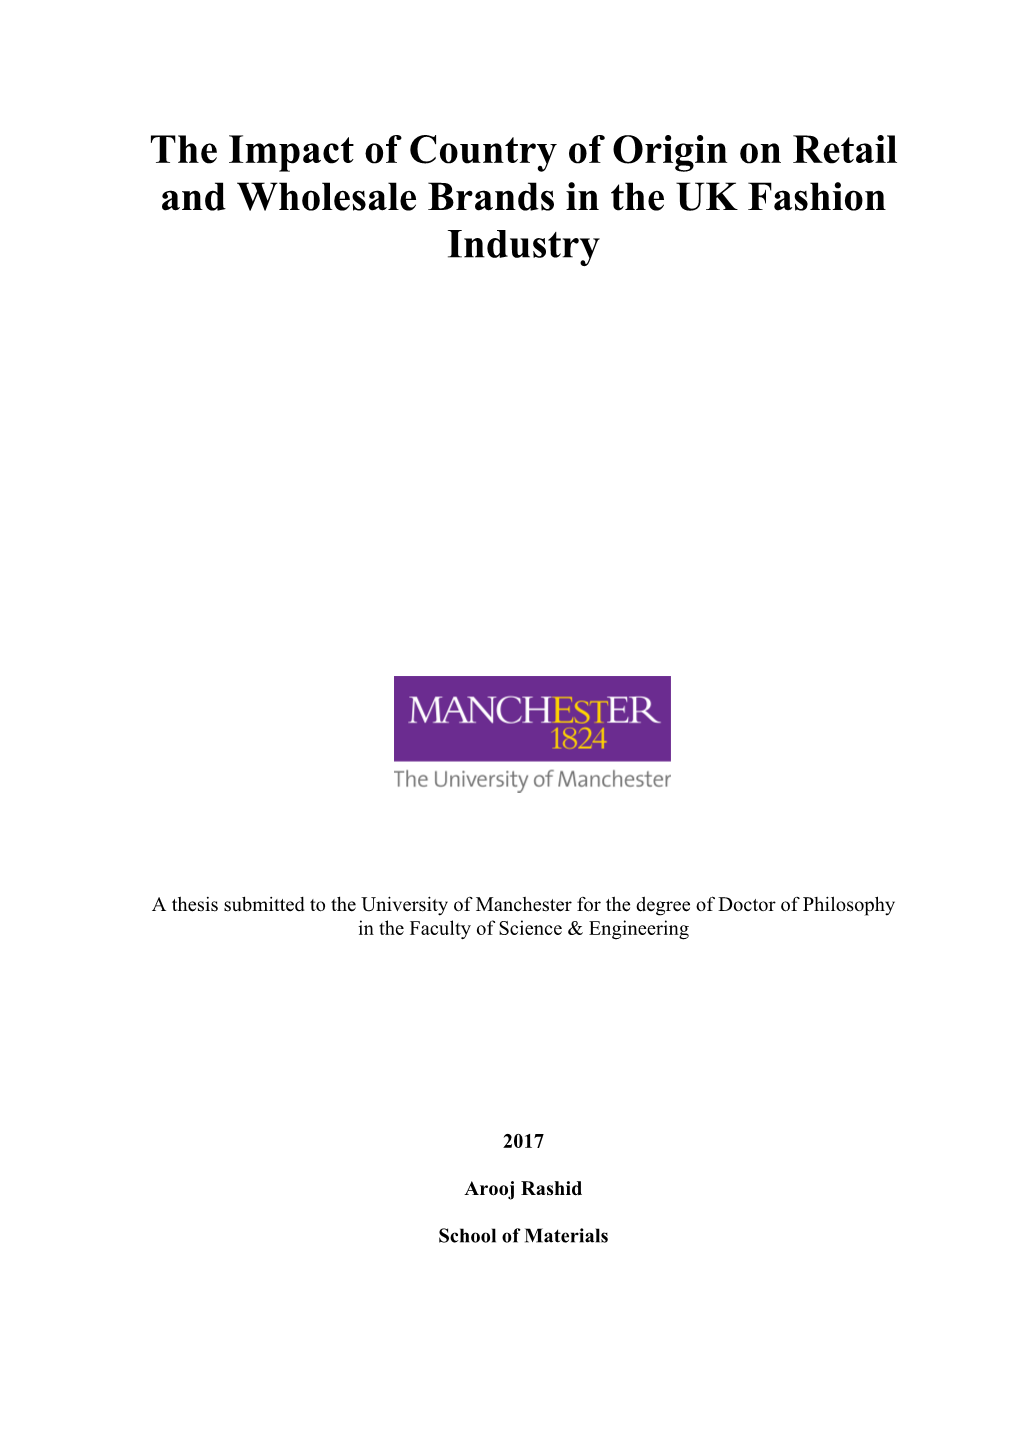 The Impact of Country of Origin on Retail and Wholesale Brands in the UK Fashion Industry